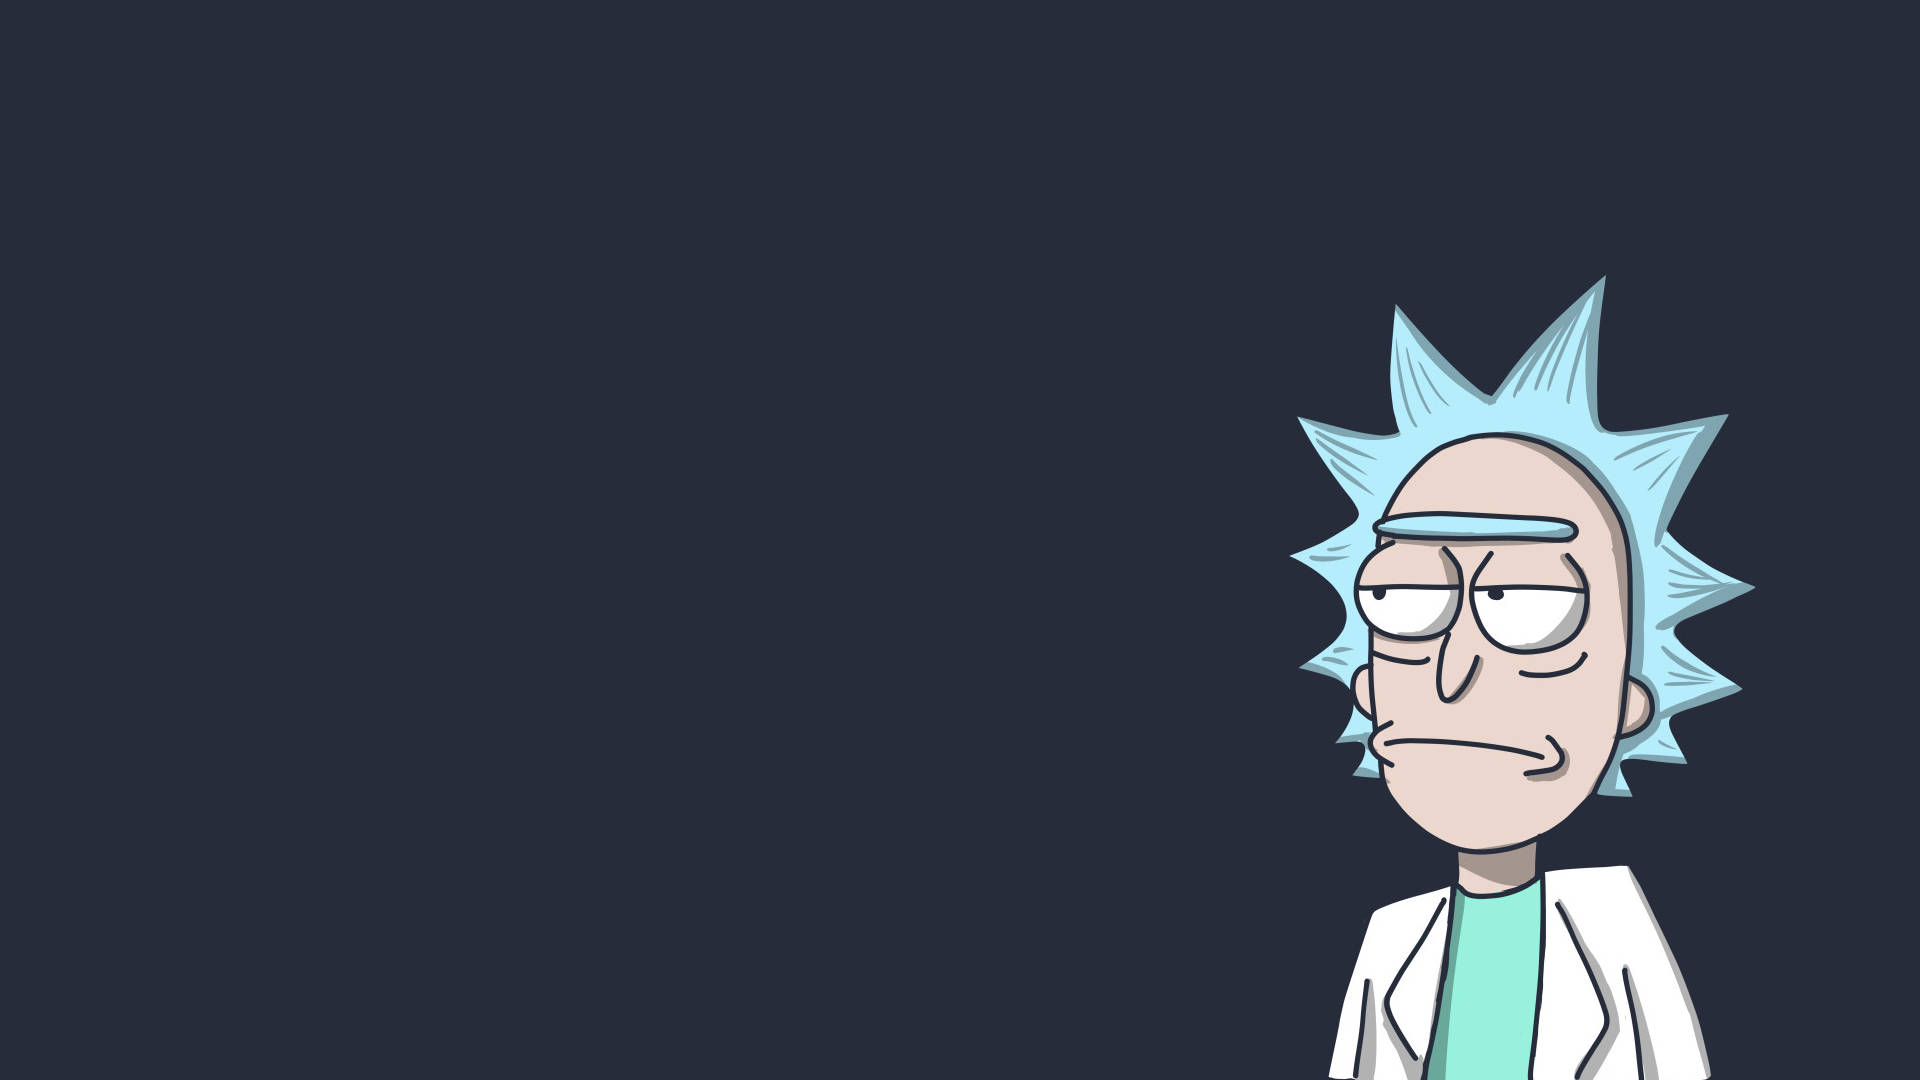 Rick Sanchez of the hit show Rick and Morty Wallpaper